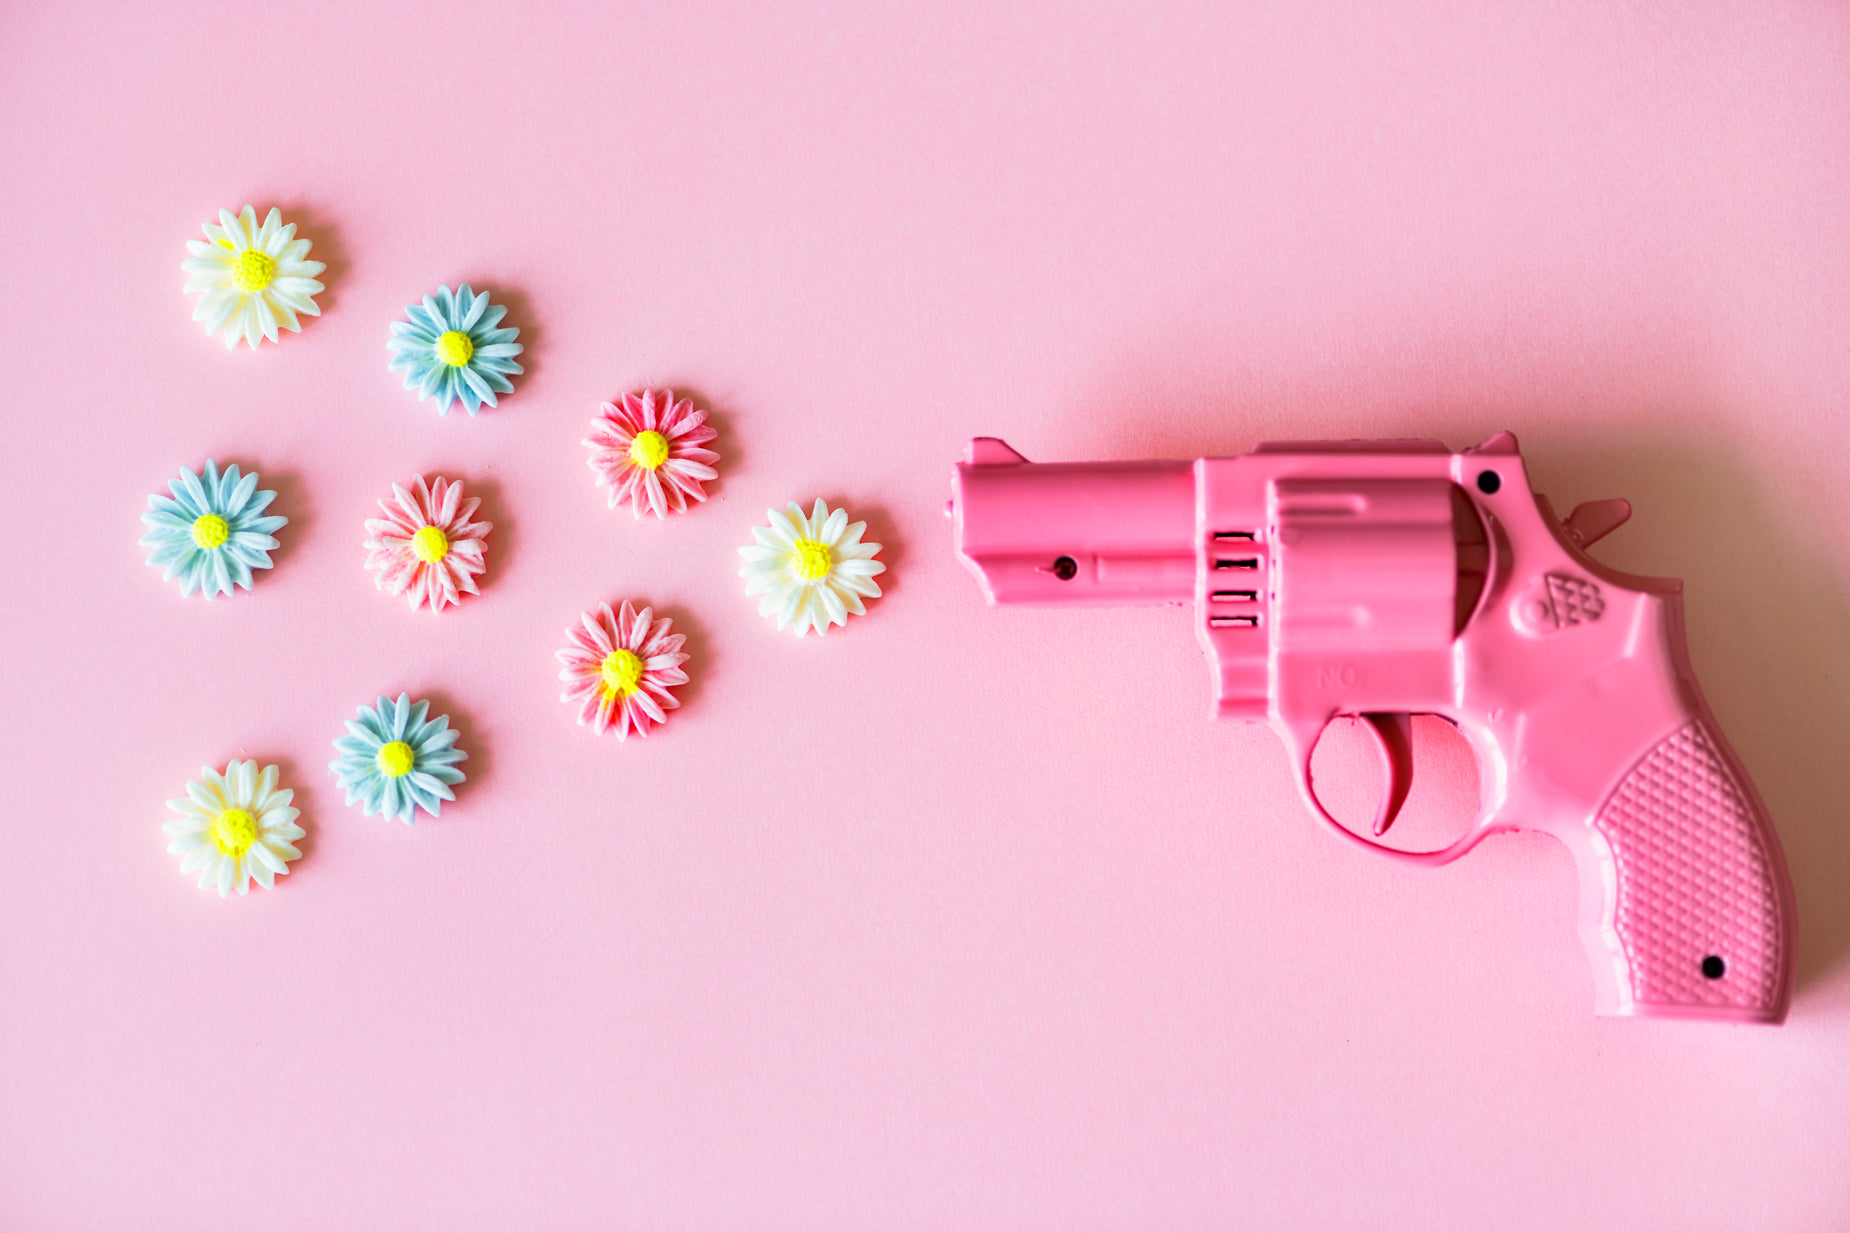 an arrangement of pink and blue flowers and a pink toy gun